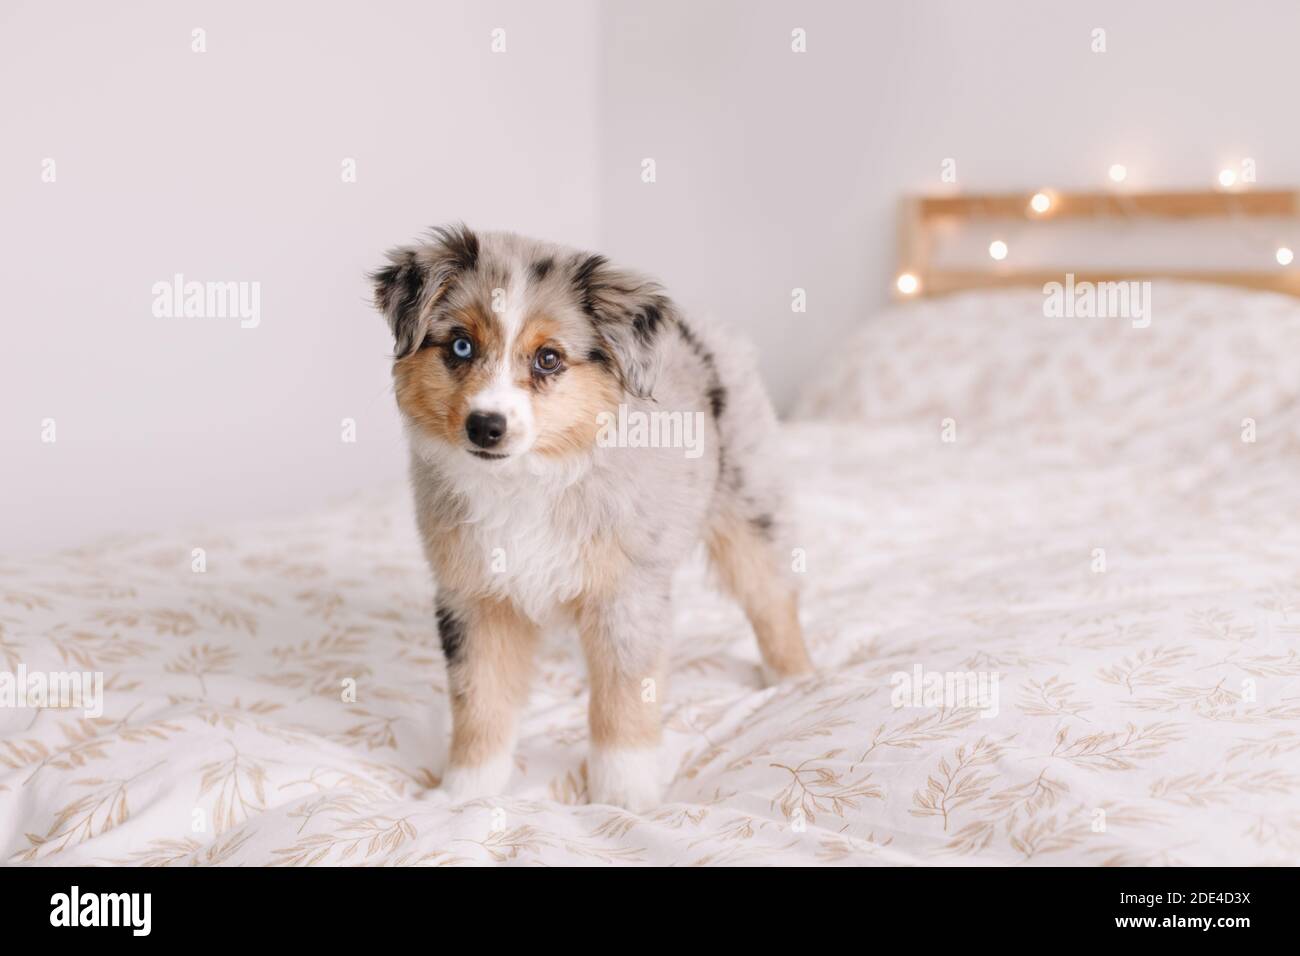 Cute small miniature Australian shepherd dog pet on bed at home. Christmas New Year holiday celebration. Adorable dog puppy with different color eyes Stock Photo